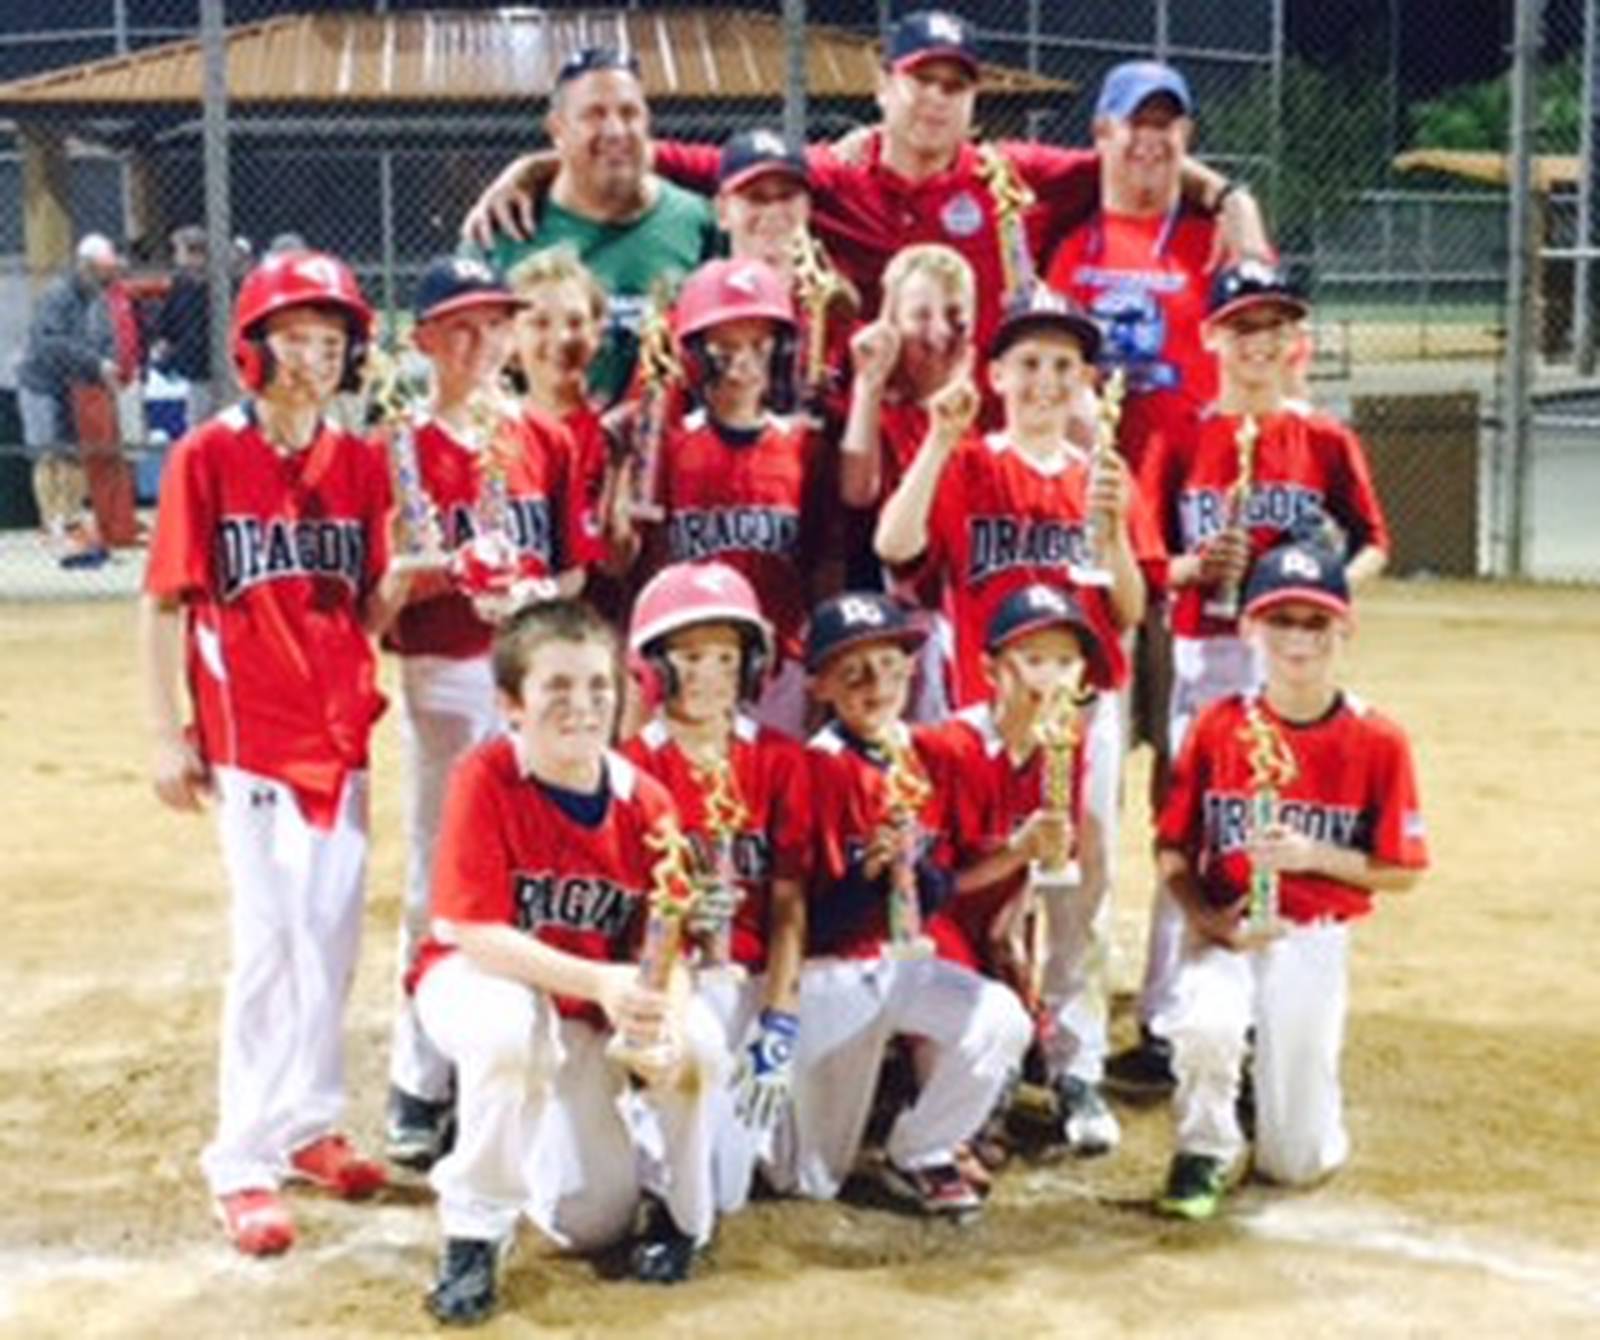 Downers Grove Dragons win Memorial Day baseball tournament Shaw Local